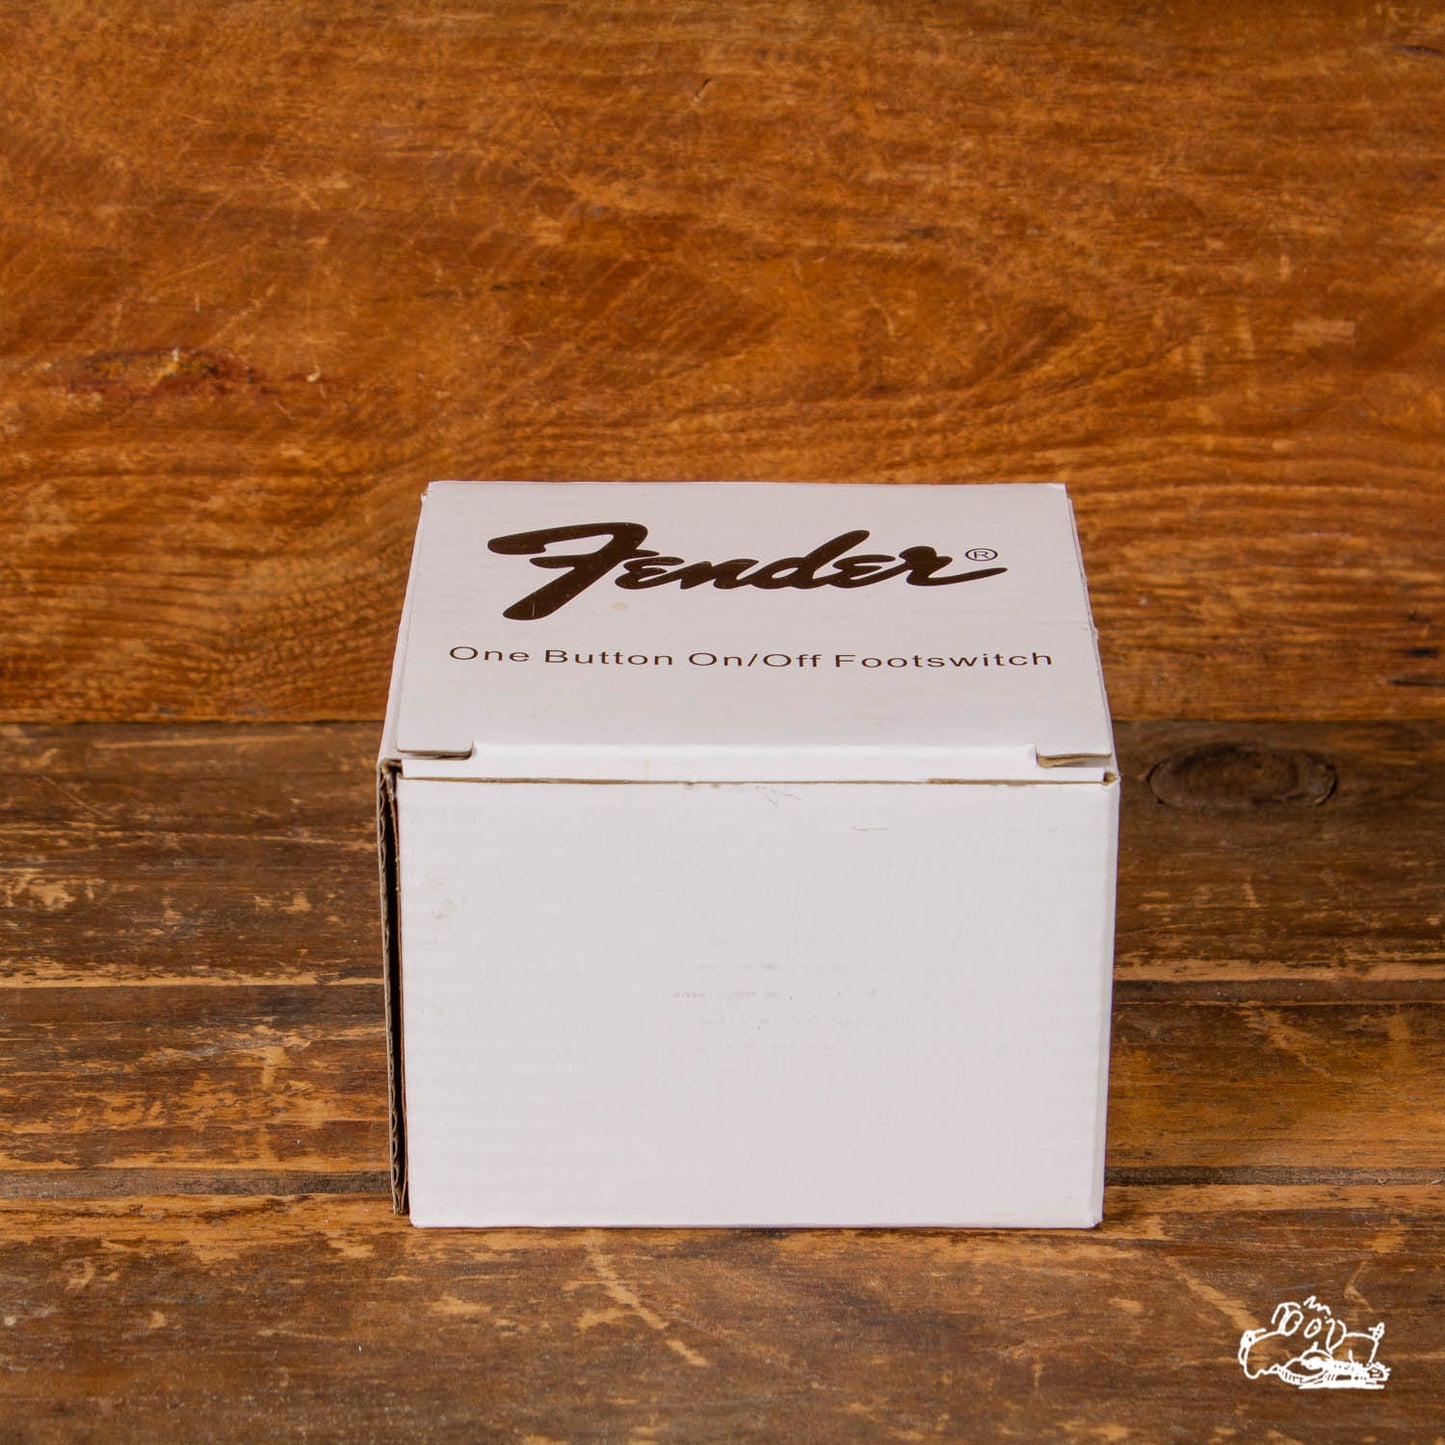 Fender Single-Button On/Off Footswitch